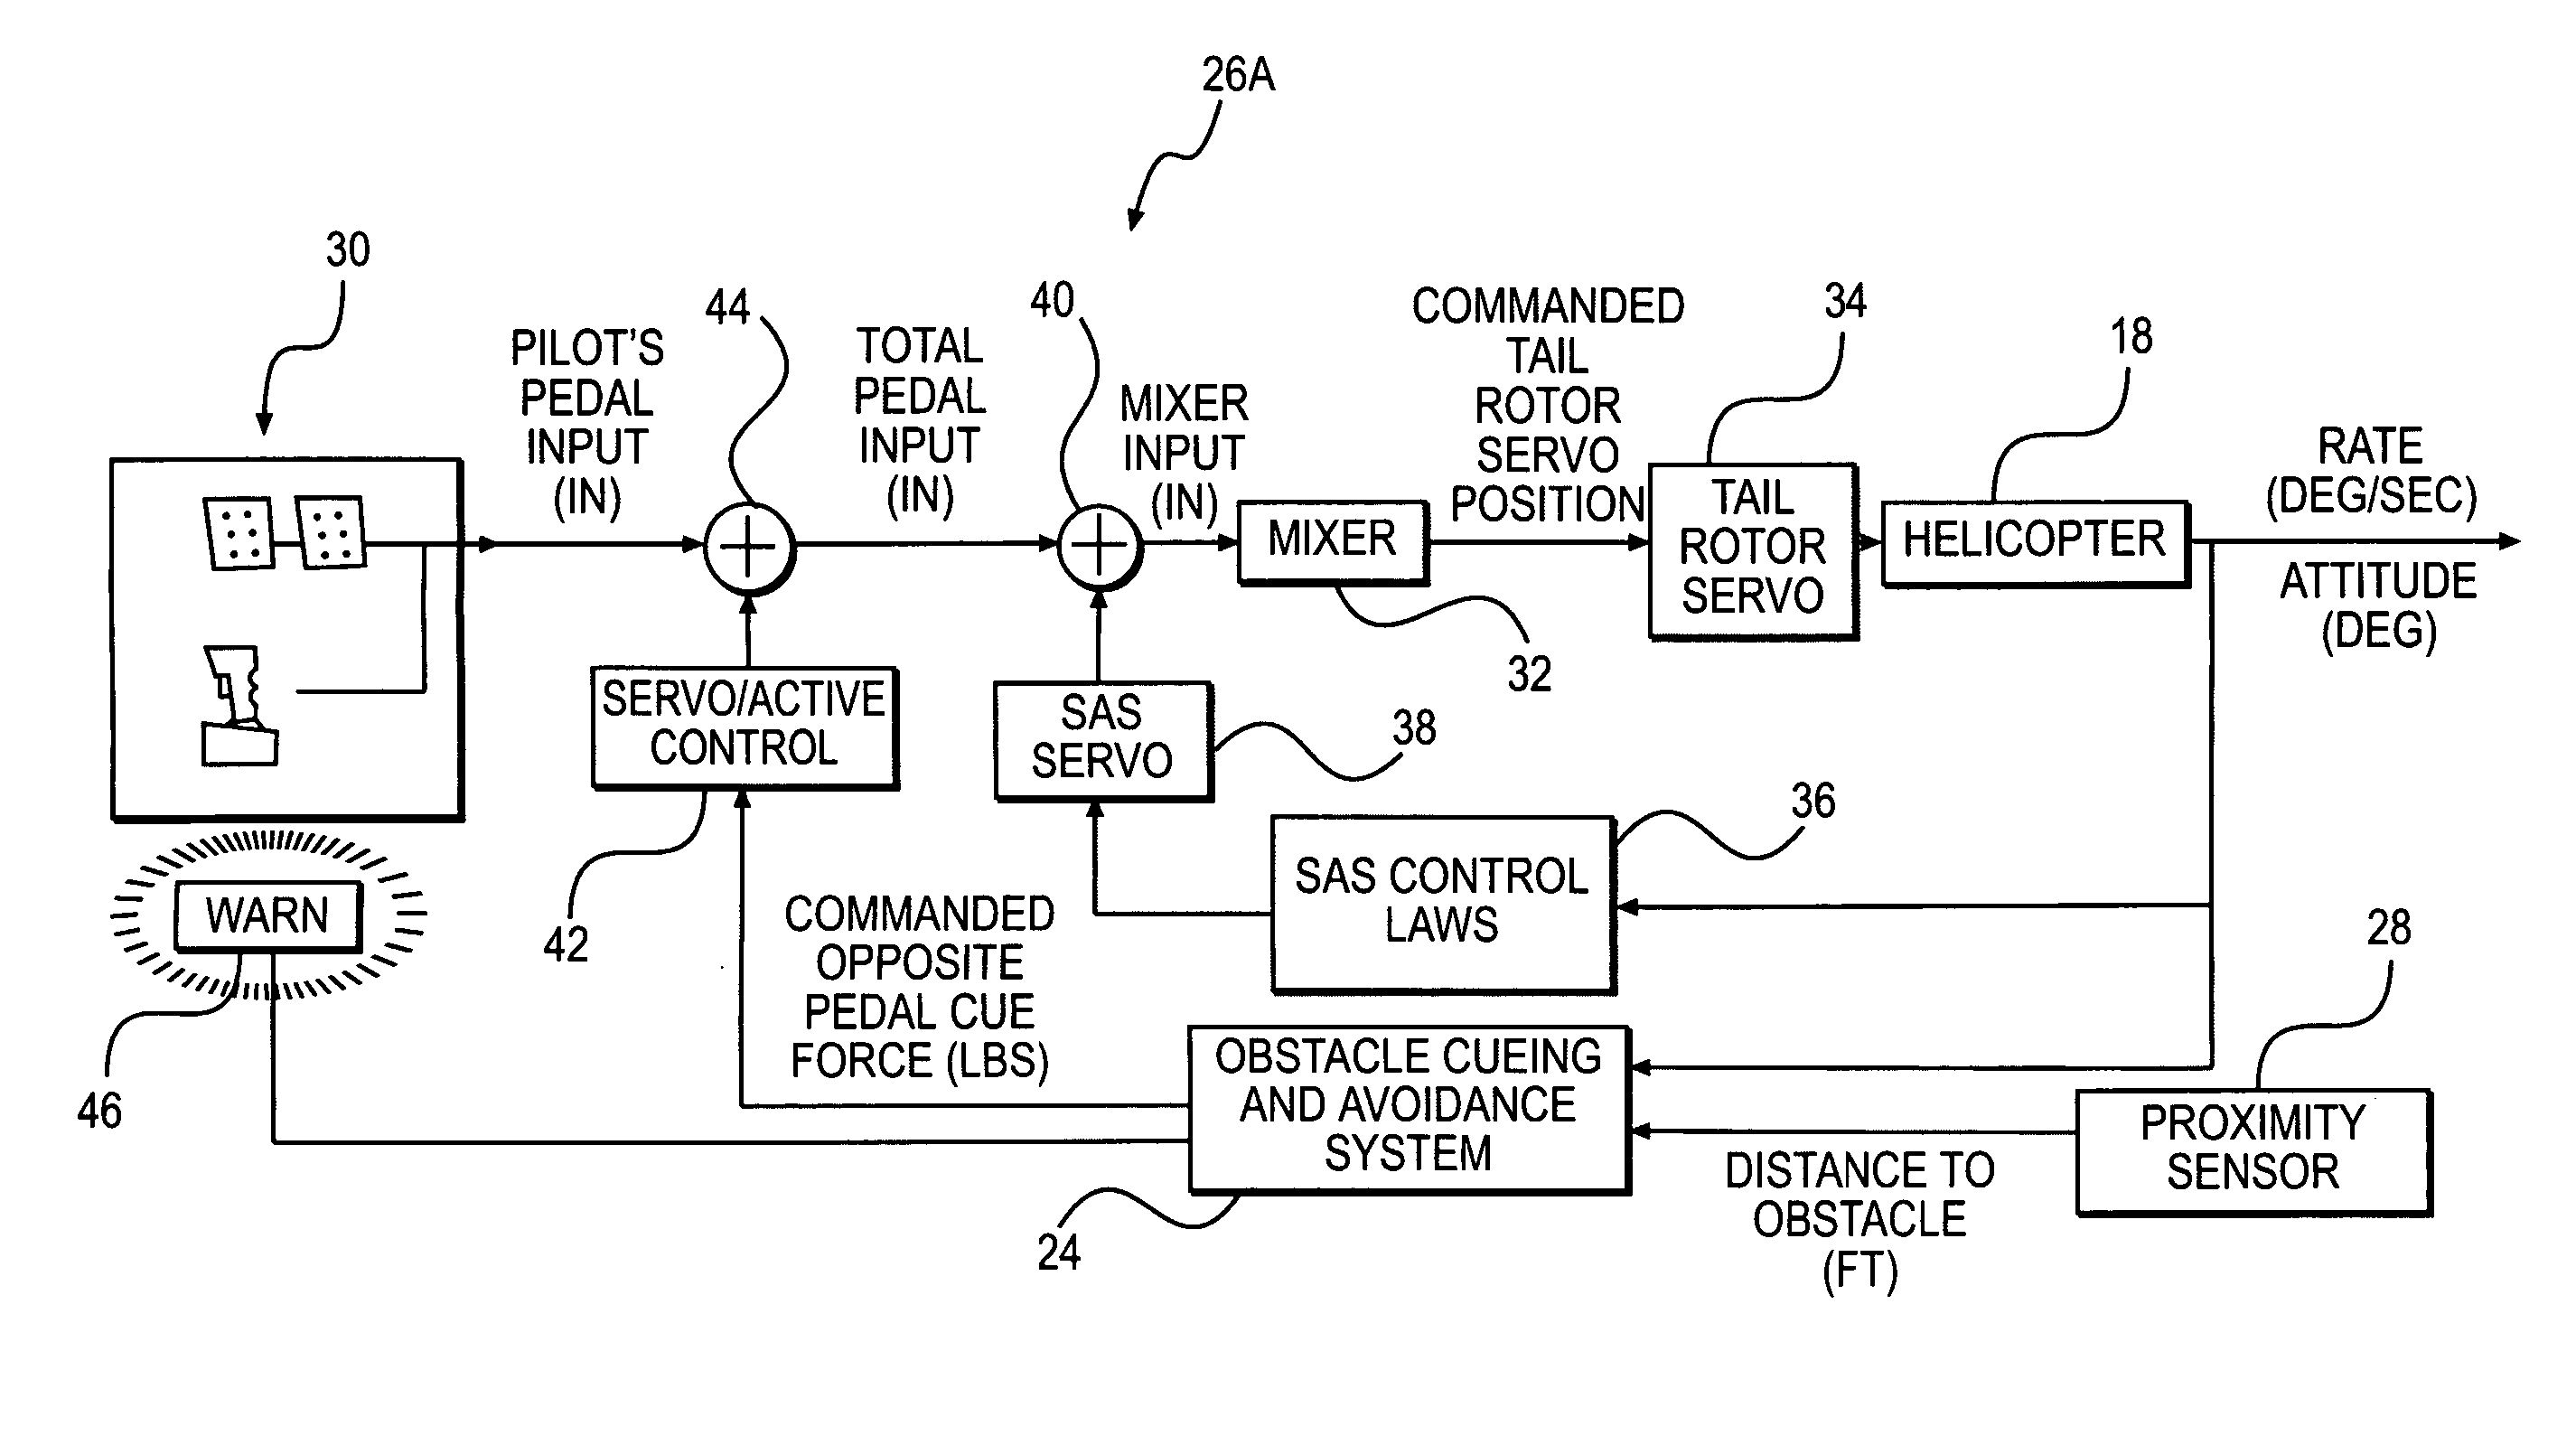 Rotary wing aircraft flight control system with a proximity cueing and avoidance system